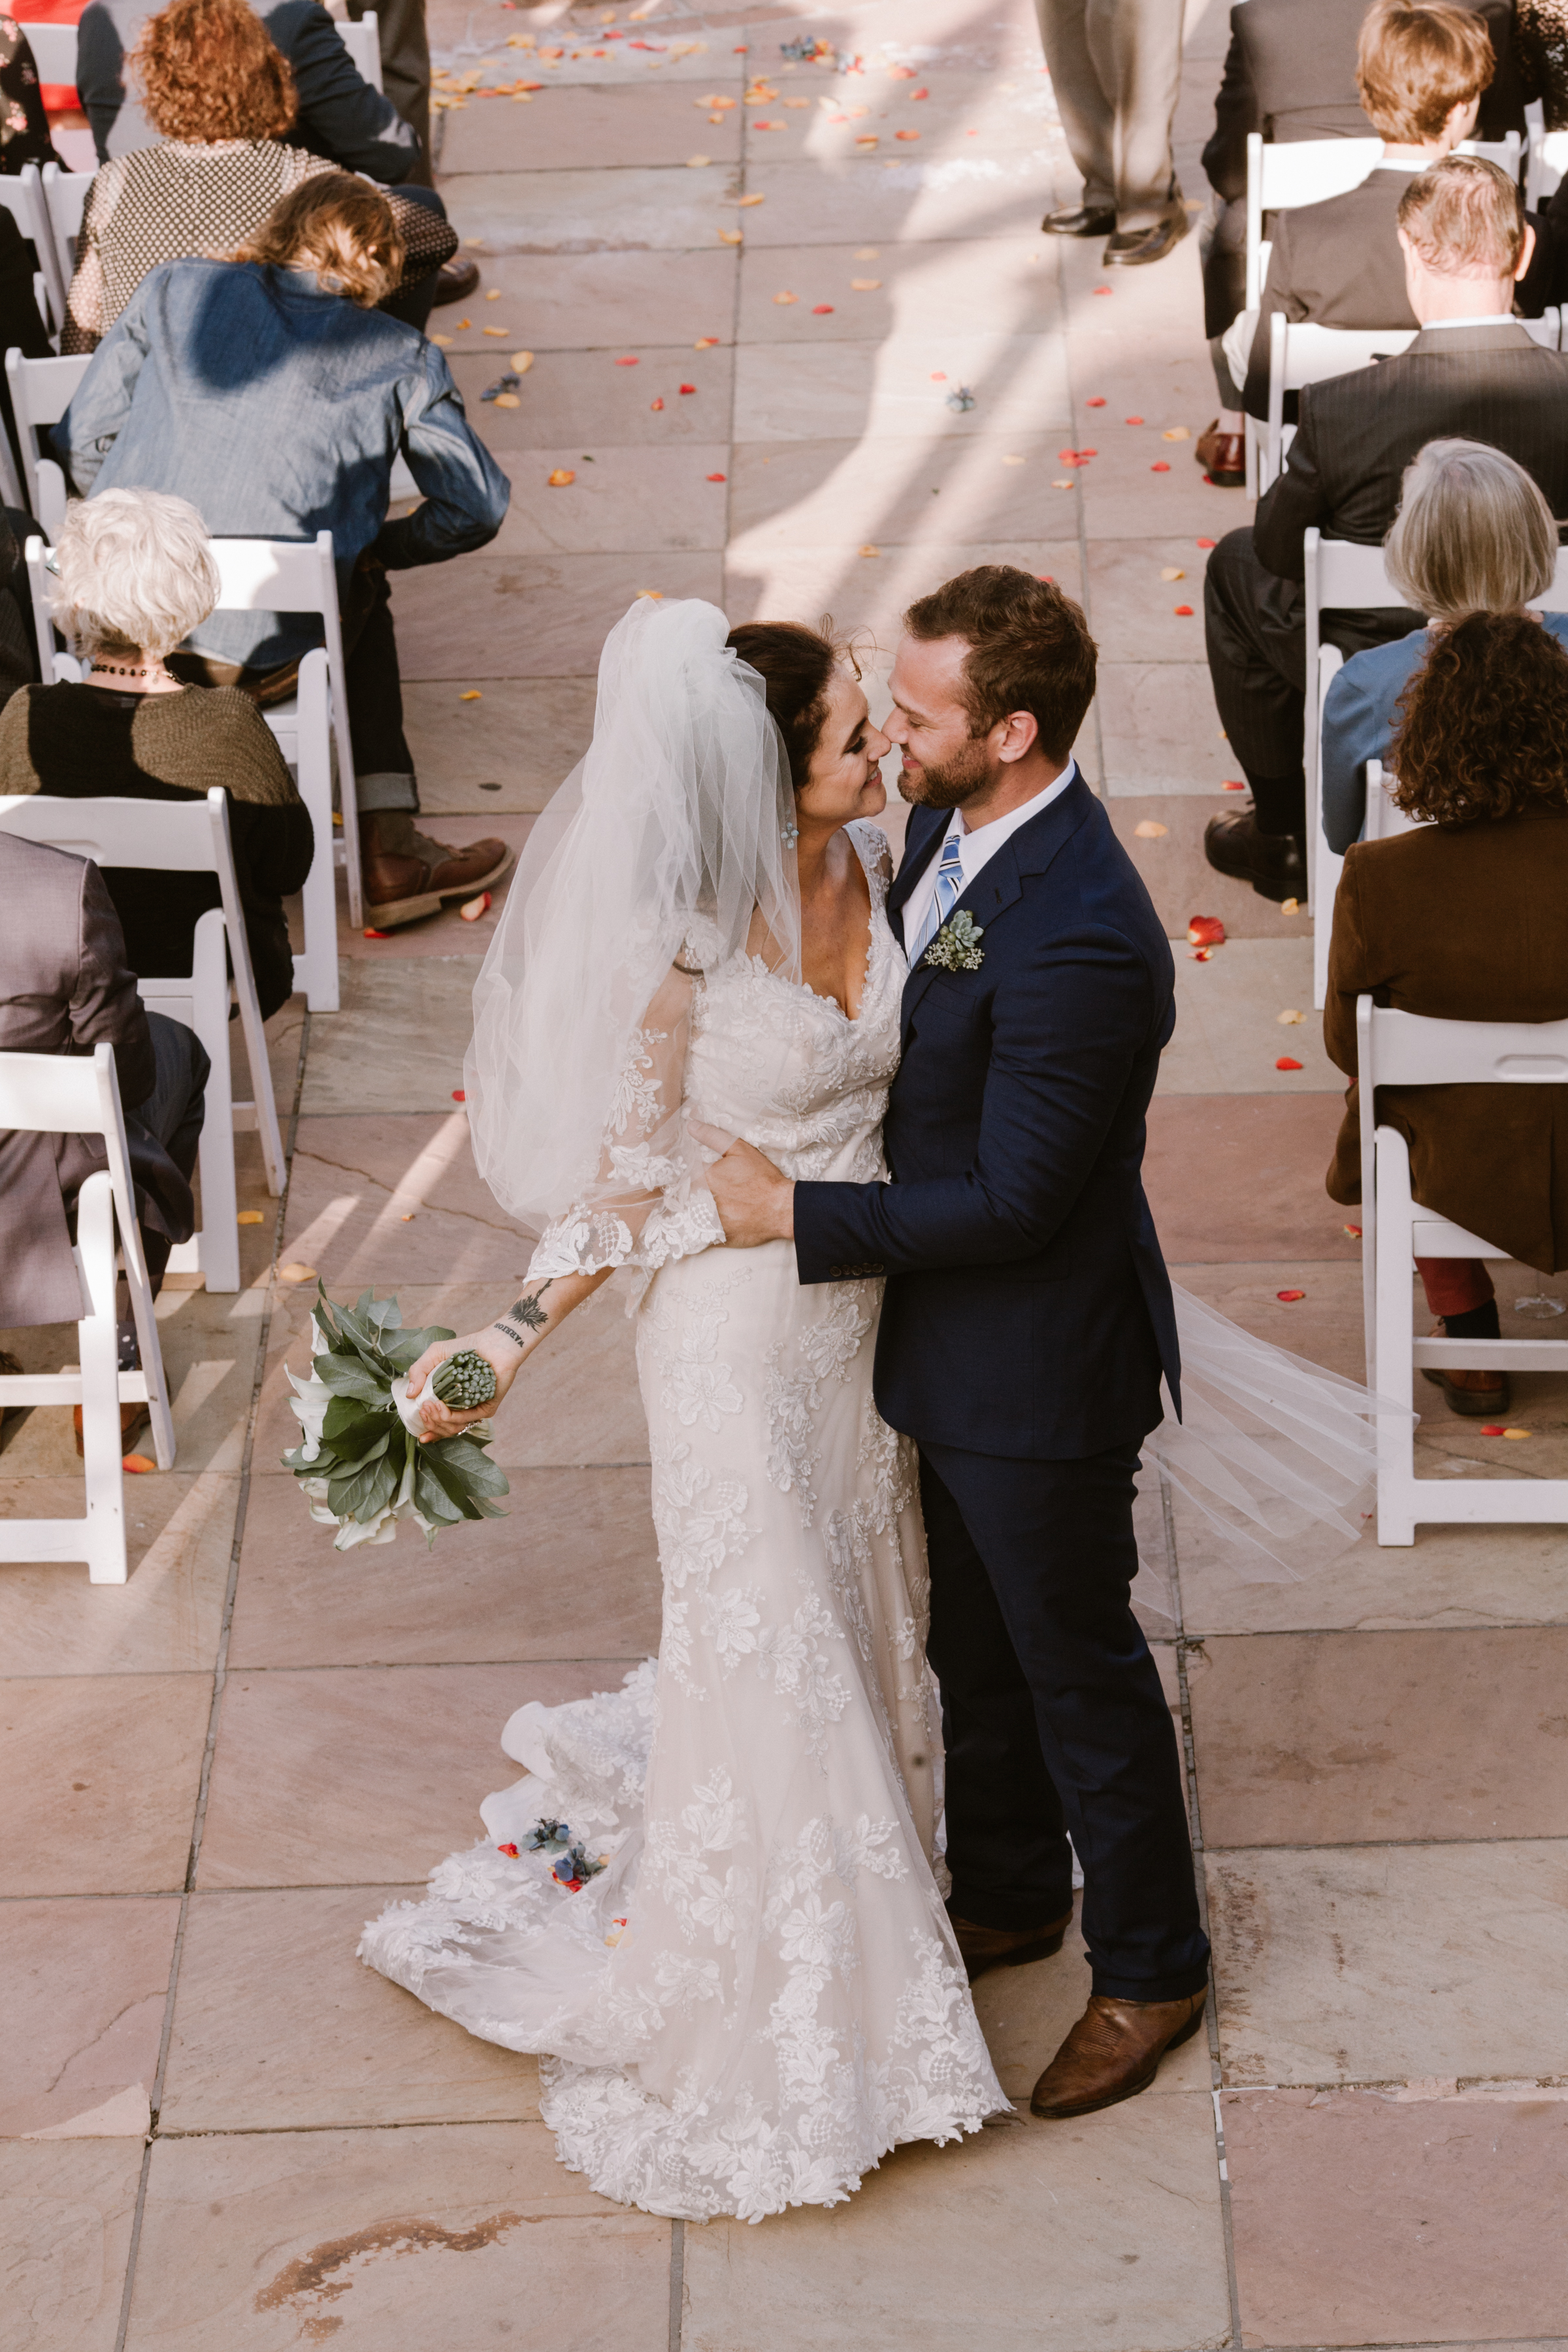 New Mexico wedding Santa Fe planning La Fonda gown suit inspiration design floral bouquet lace photography romantic styled local perfect wedding guide lilies ceremony outdoor greenery natural light Birdseye couple vows flower petals